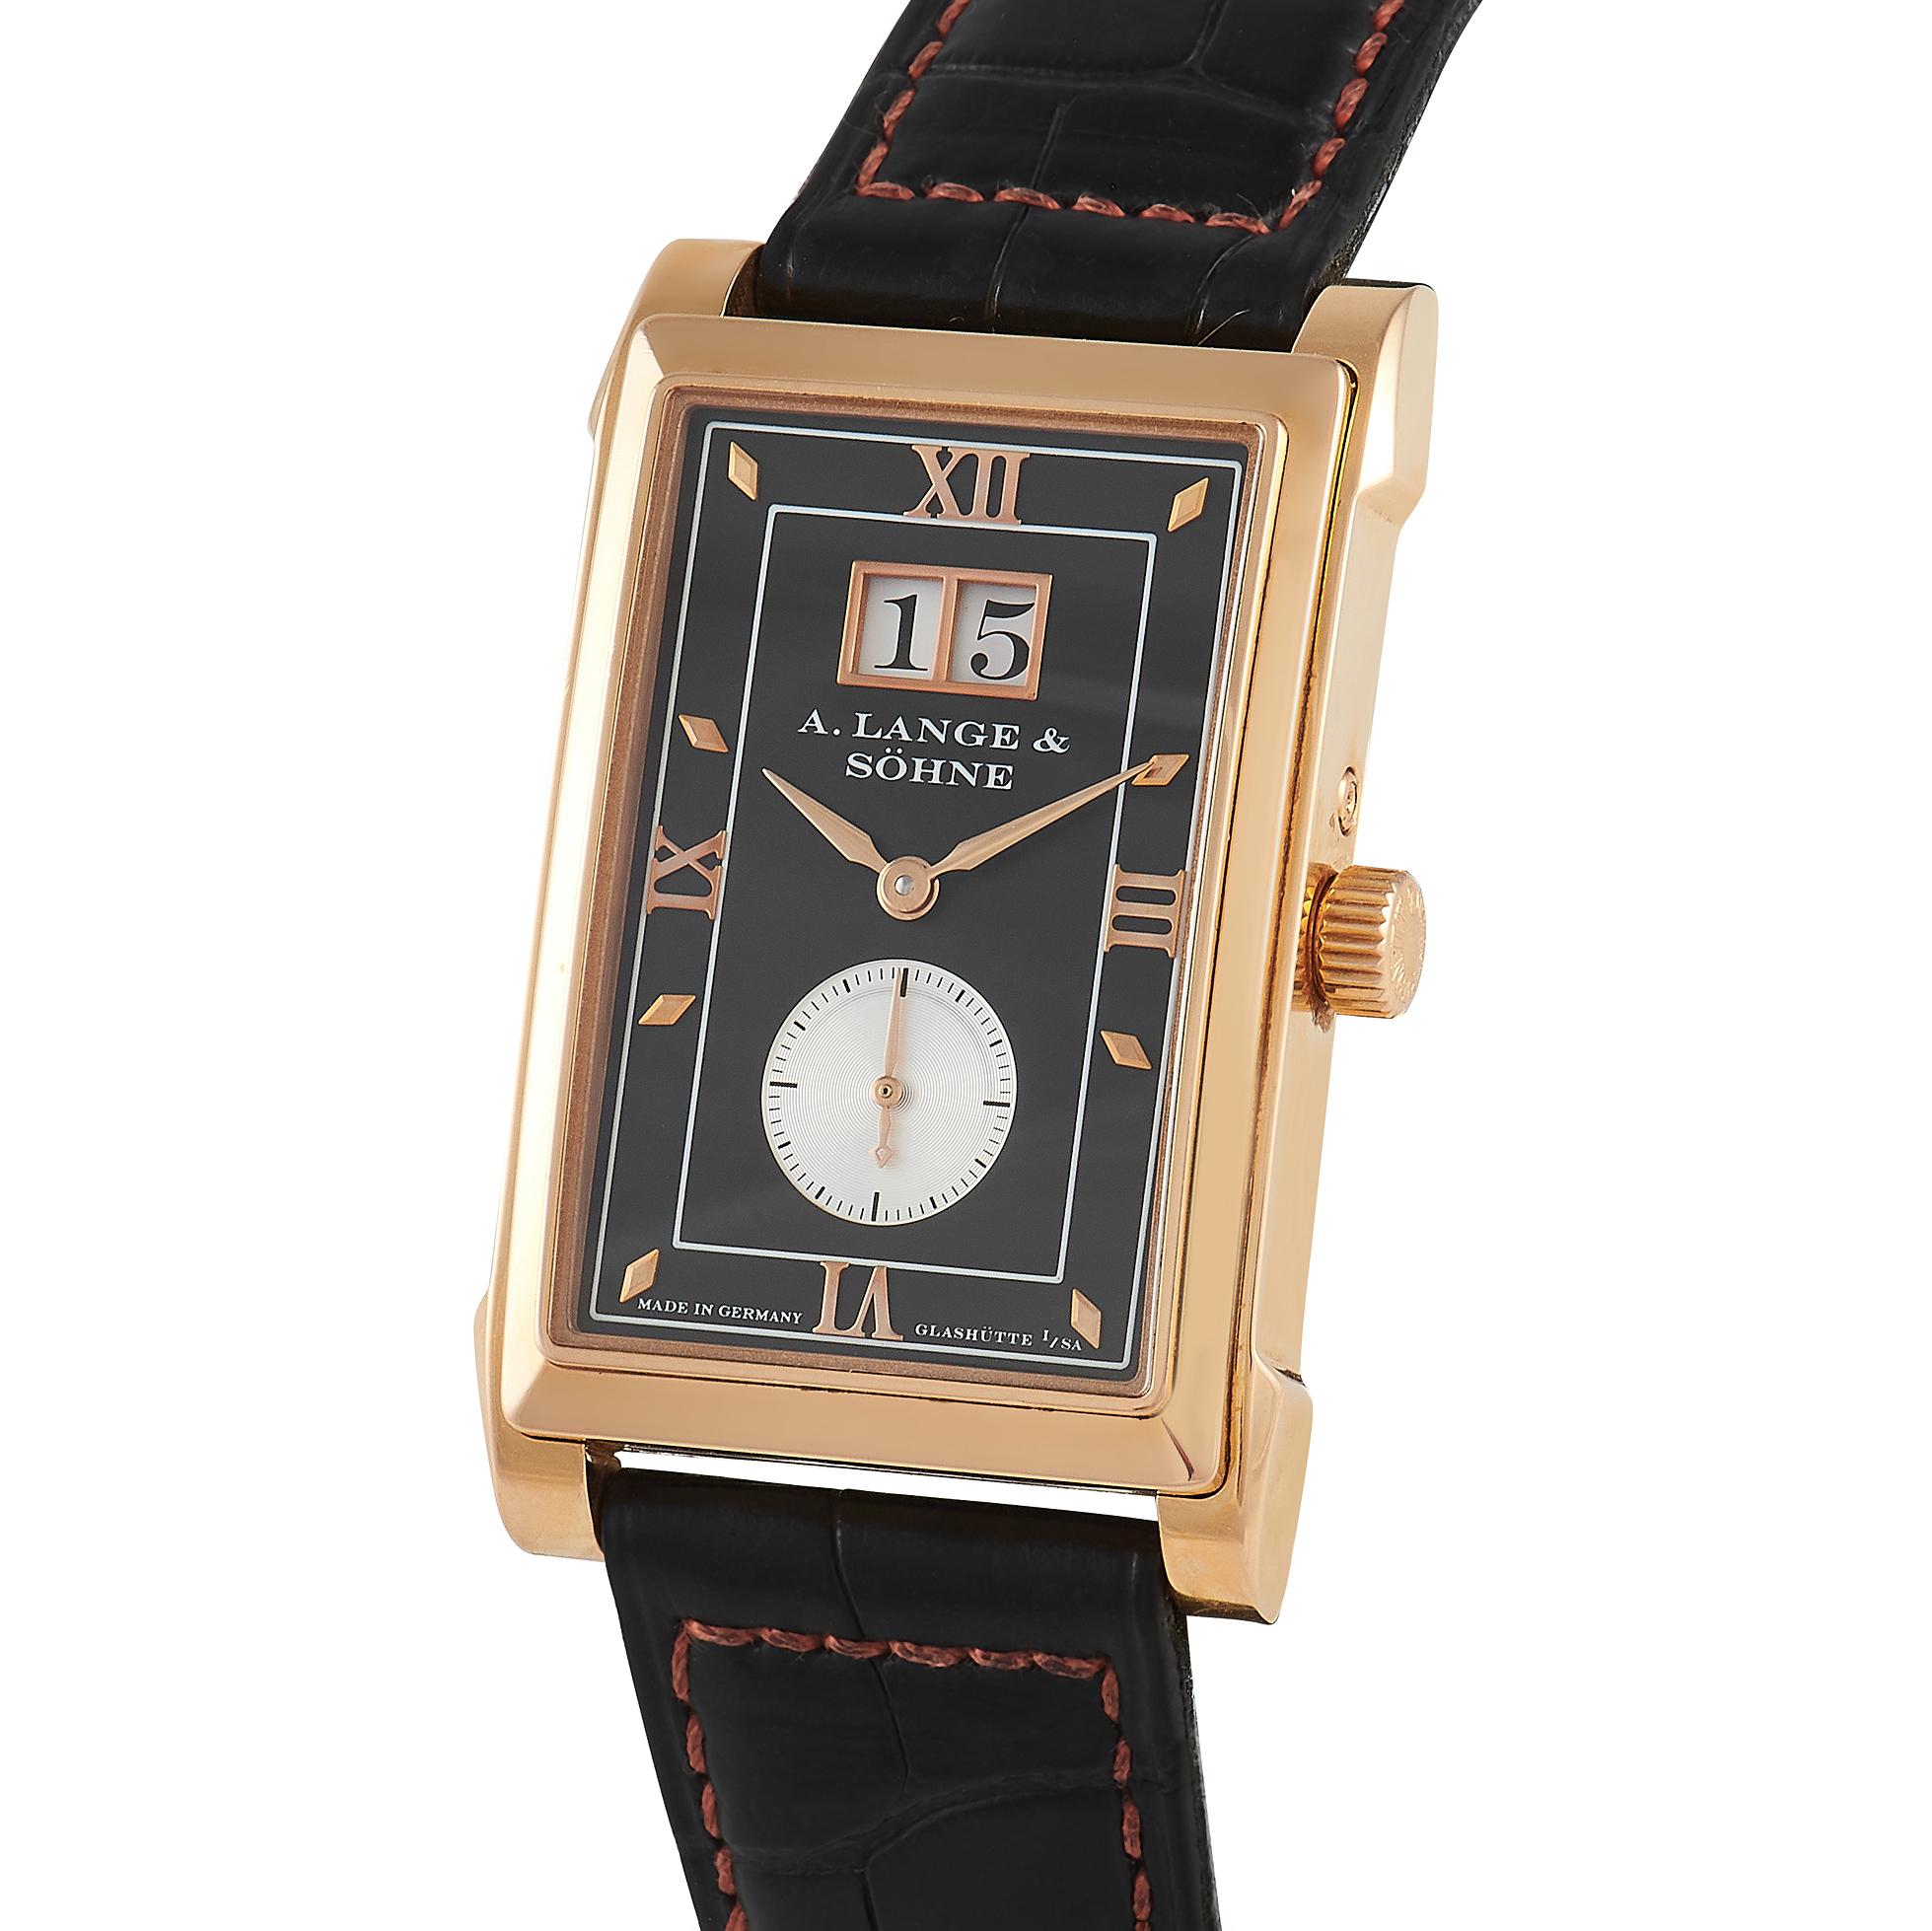 Introduced in 1997 is this rectangular timepiece with an elaborate case and a charming dial. The 36.3 mm x 25.5 mm three-body case is fashioned from 18K rose gold with a brushed case band, polished lugs, and a stepped bezel. Everything on the black